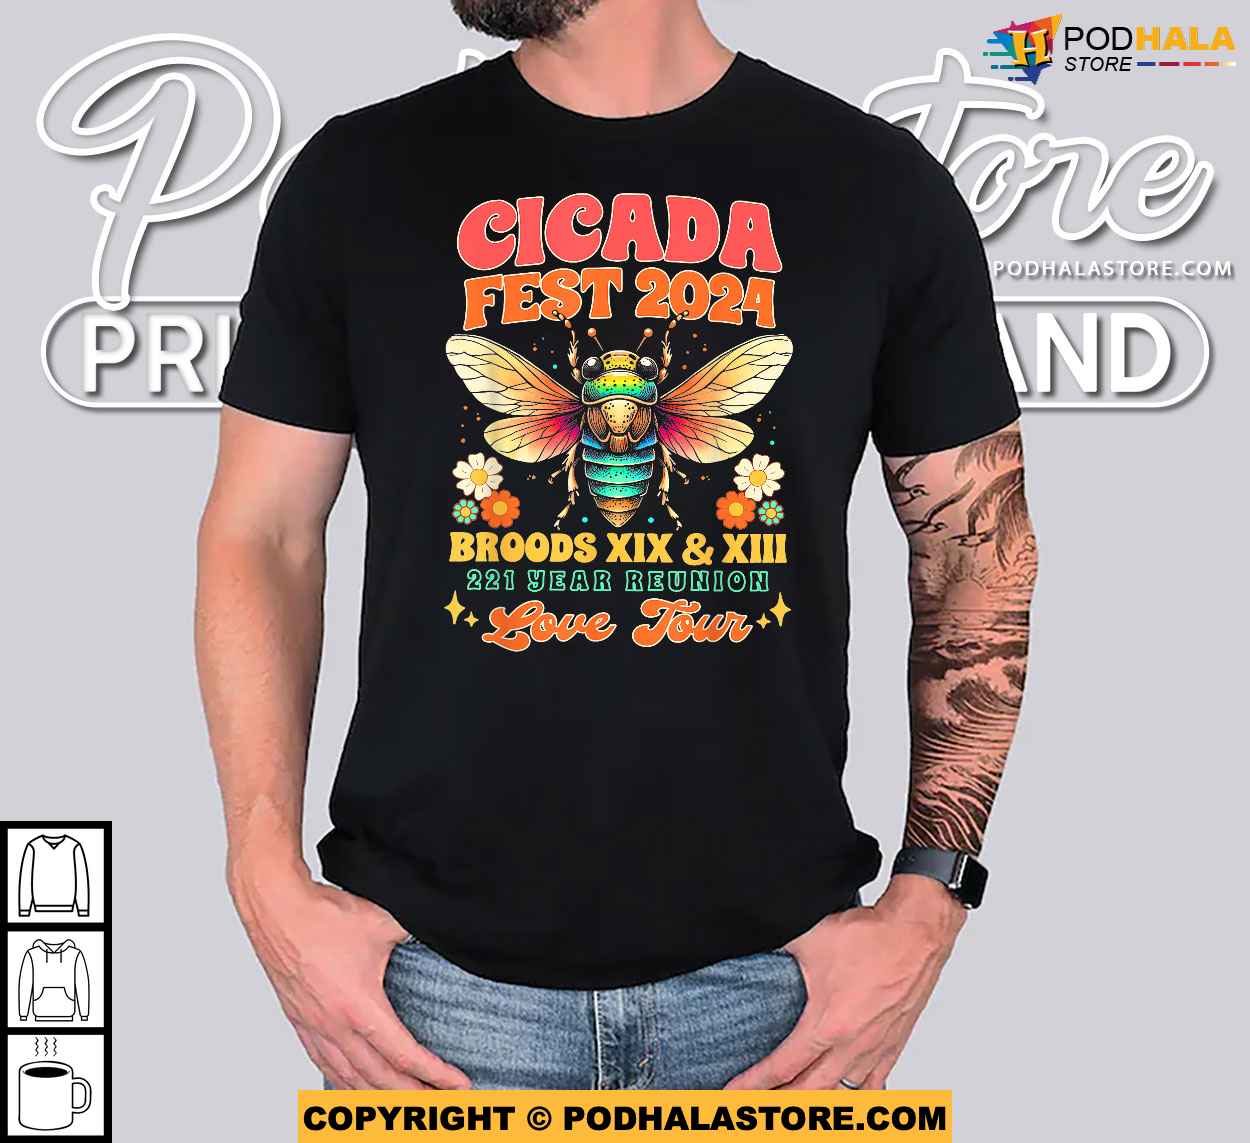 Funny Cicada Fest 2024 Shirt, Broods XIX and XIII - 221 Year Love Tour